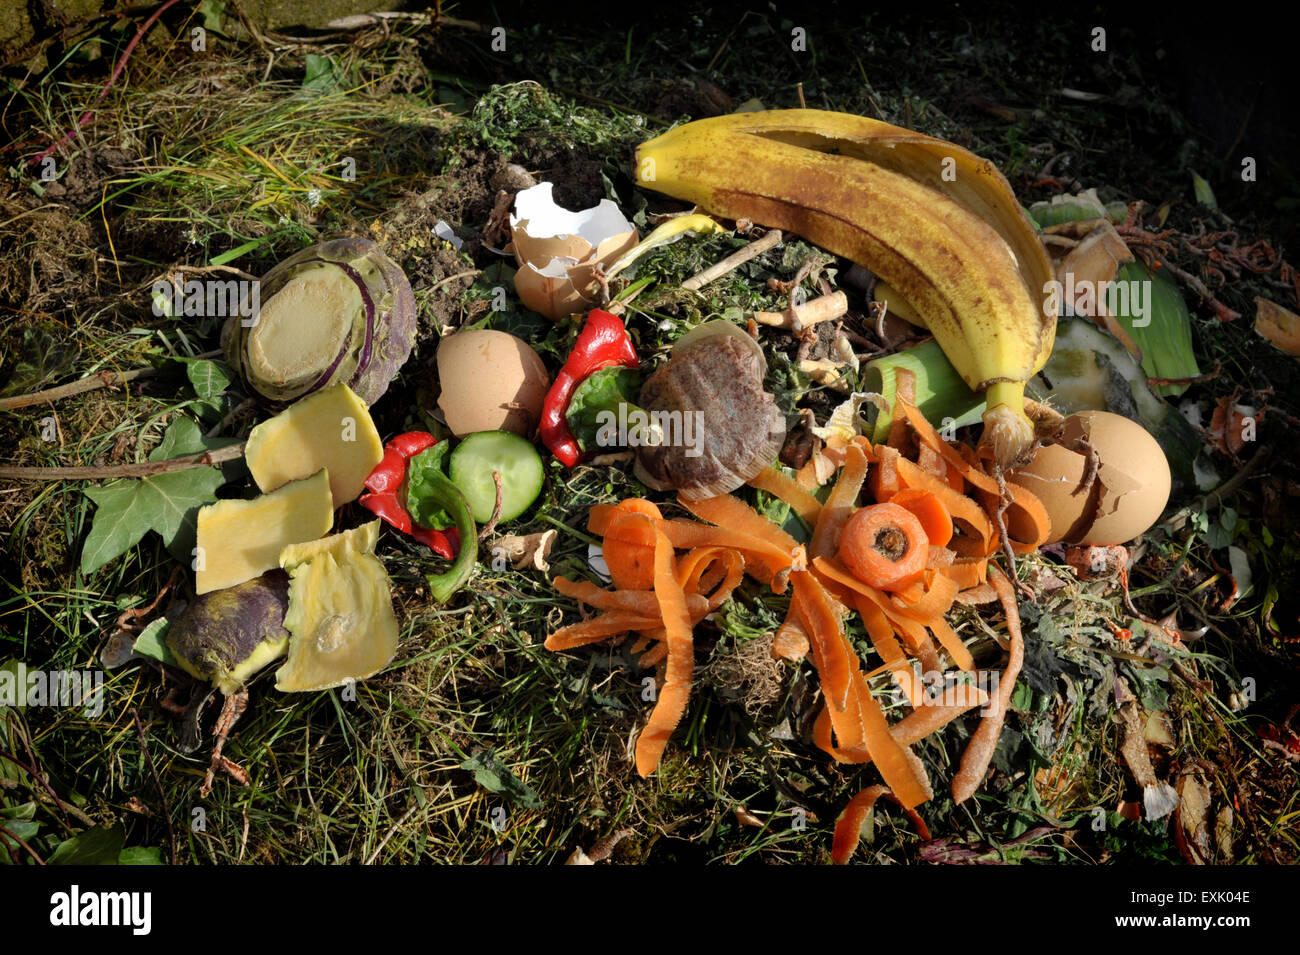 Kitchen household food and garden waste on a compost heap. Stock Photo